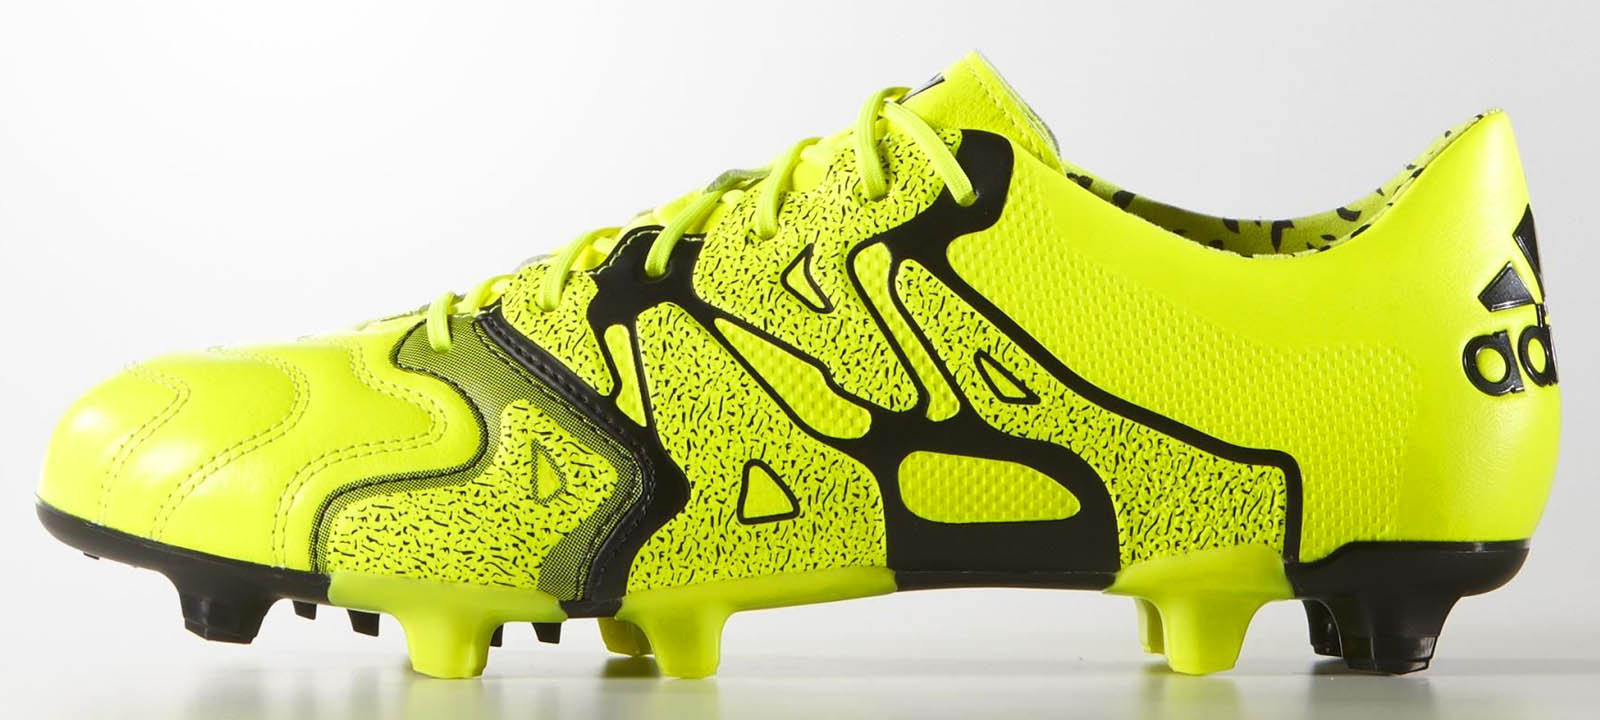 Adidas X 2015 Leather Boots Released - Footy Headlines